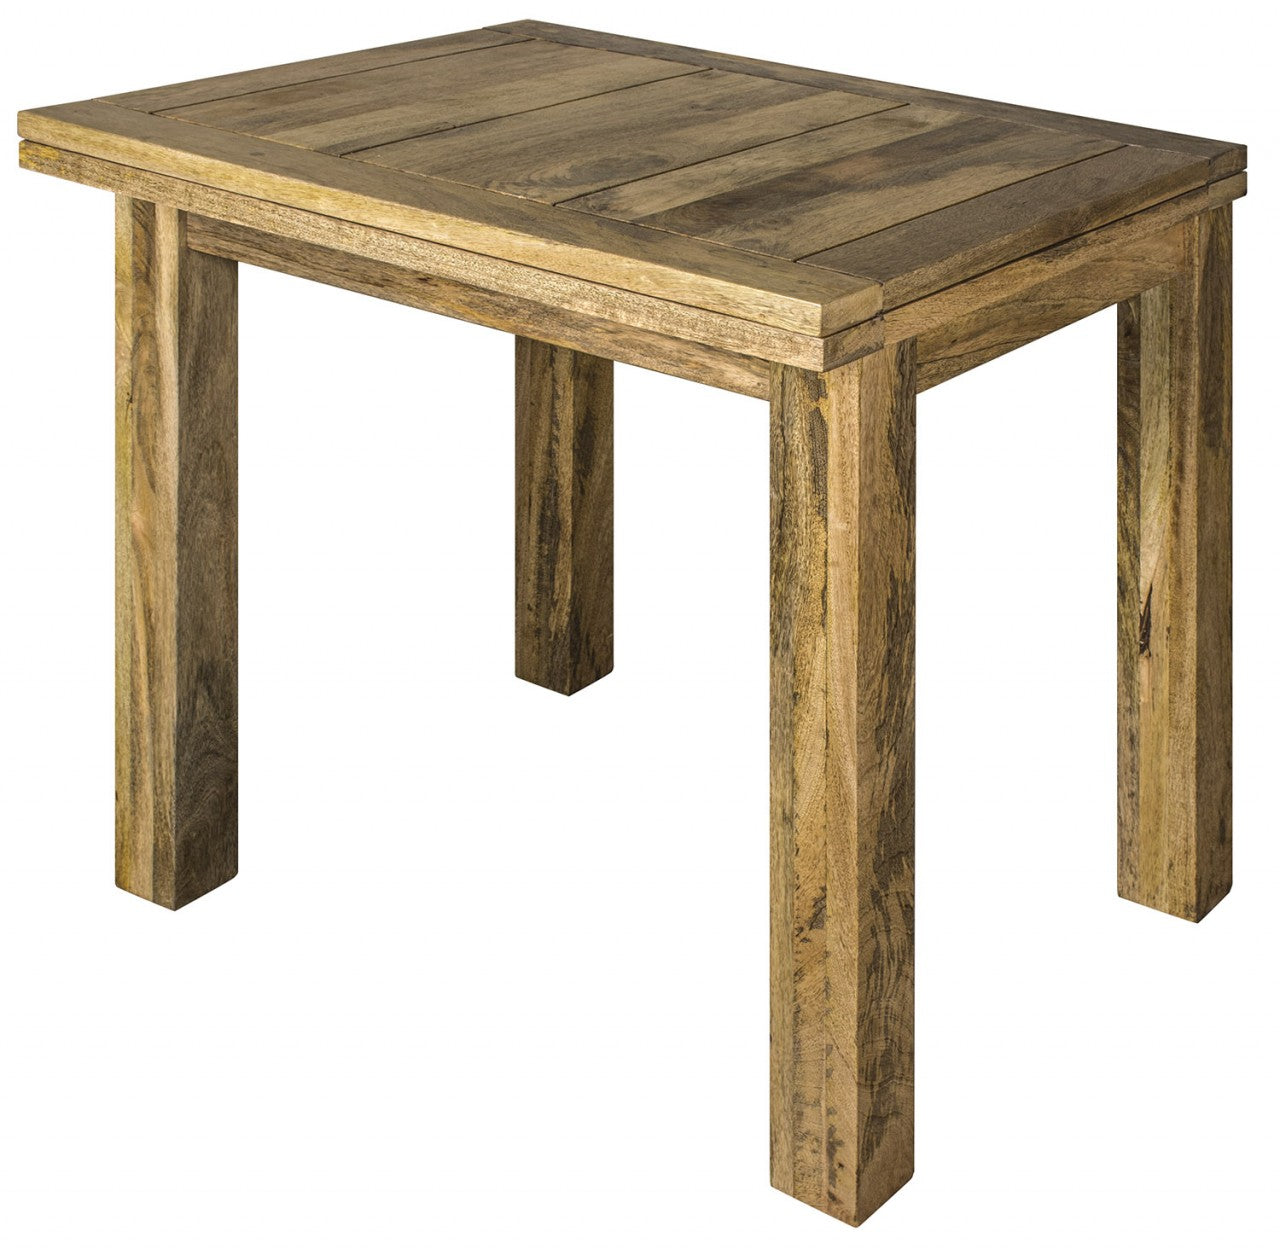 Solid Wood Granary Royale Extendable Oblong Dining Table